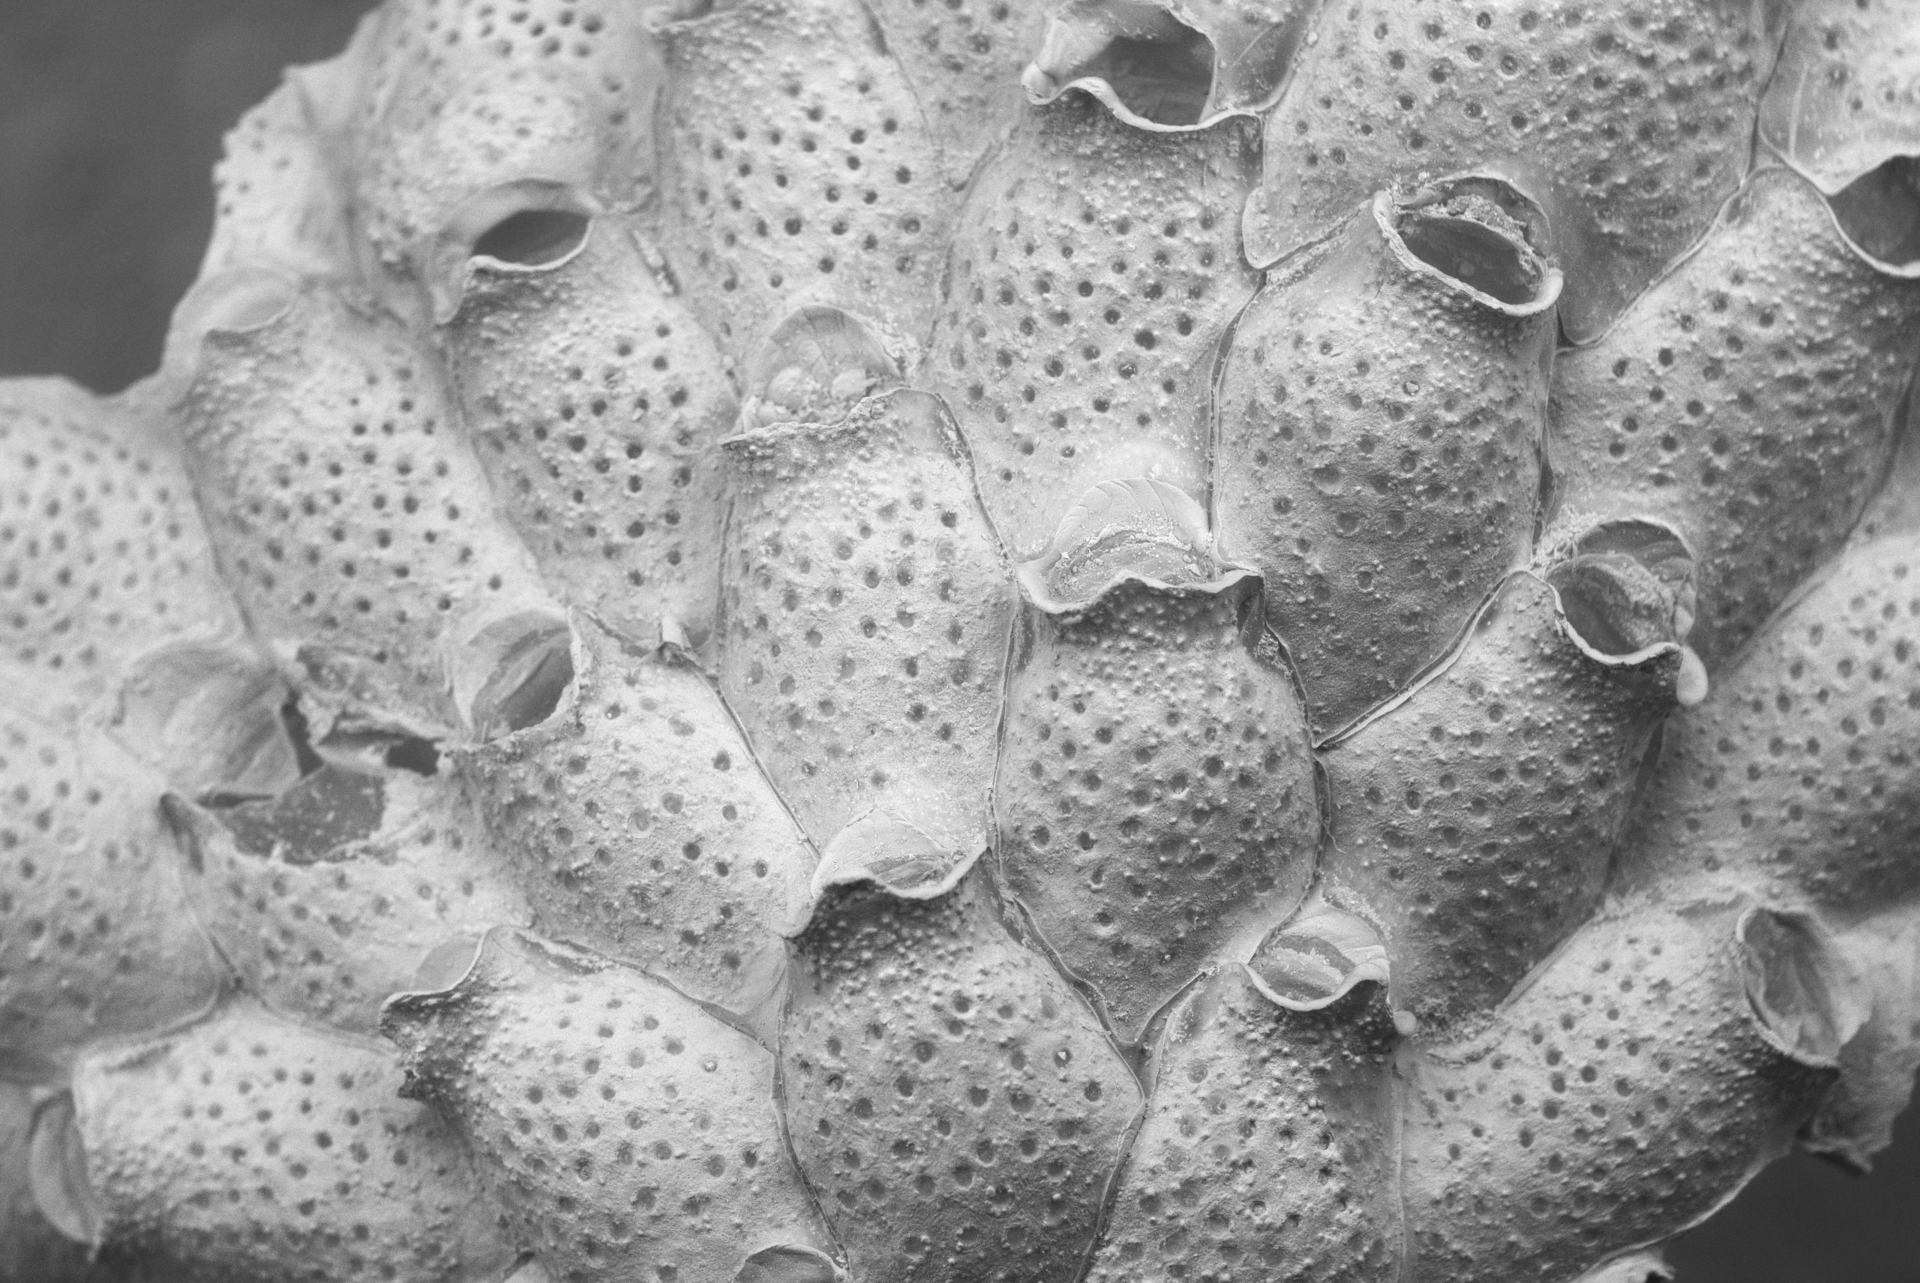 Picture of Cheilopora sincera showing pores distributed all over the frontal shield